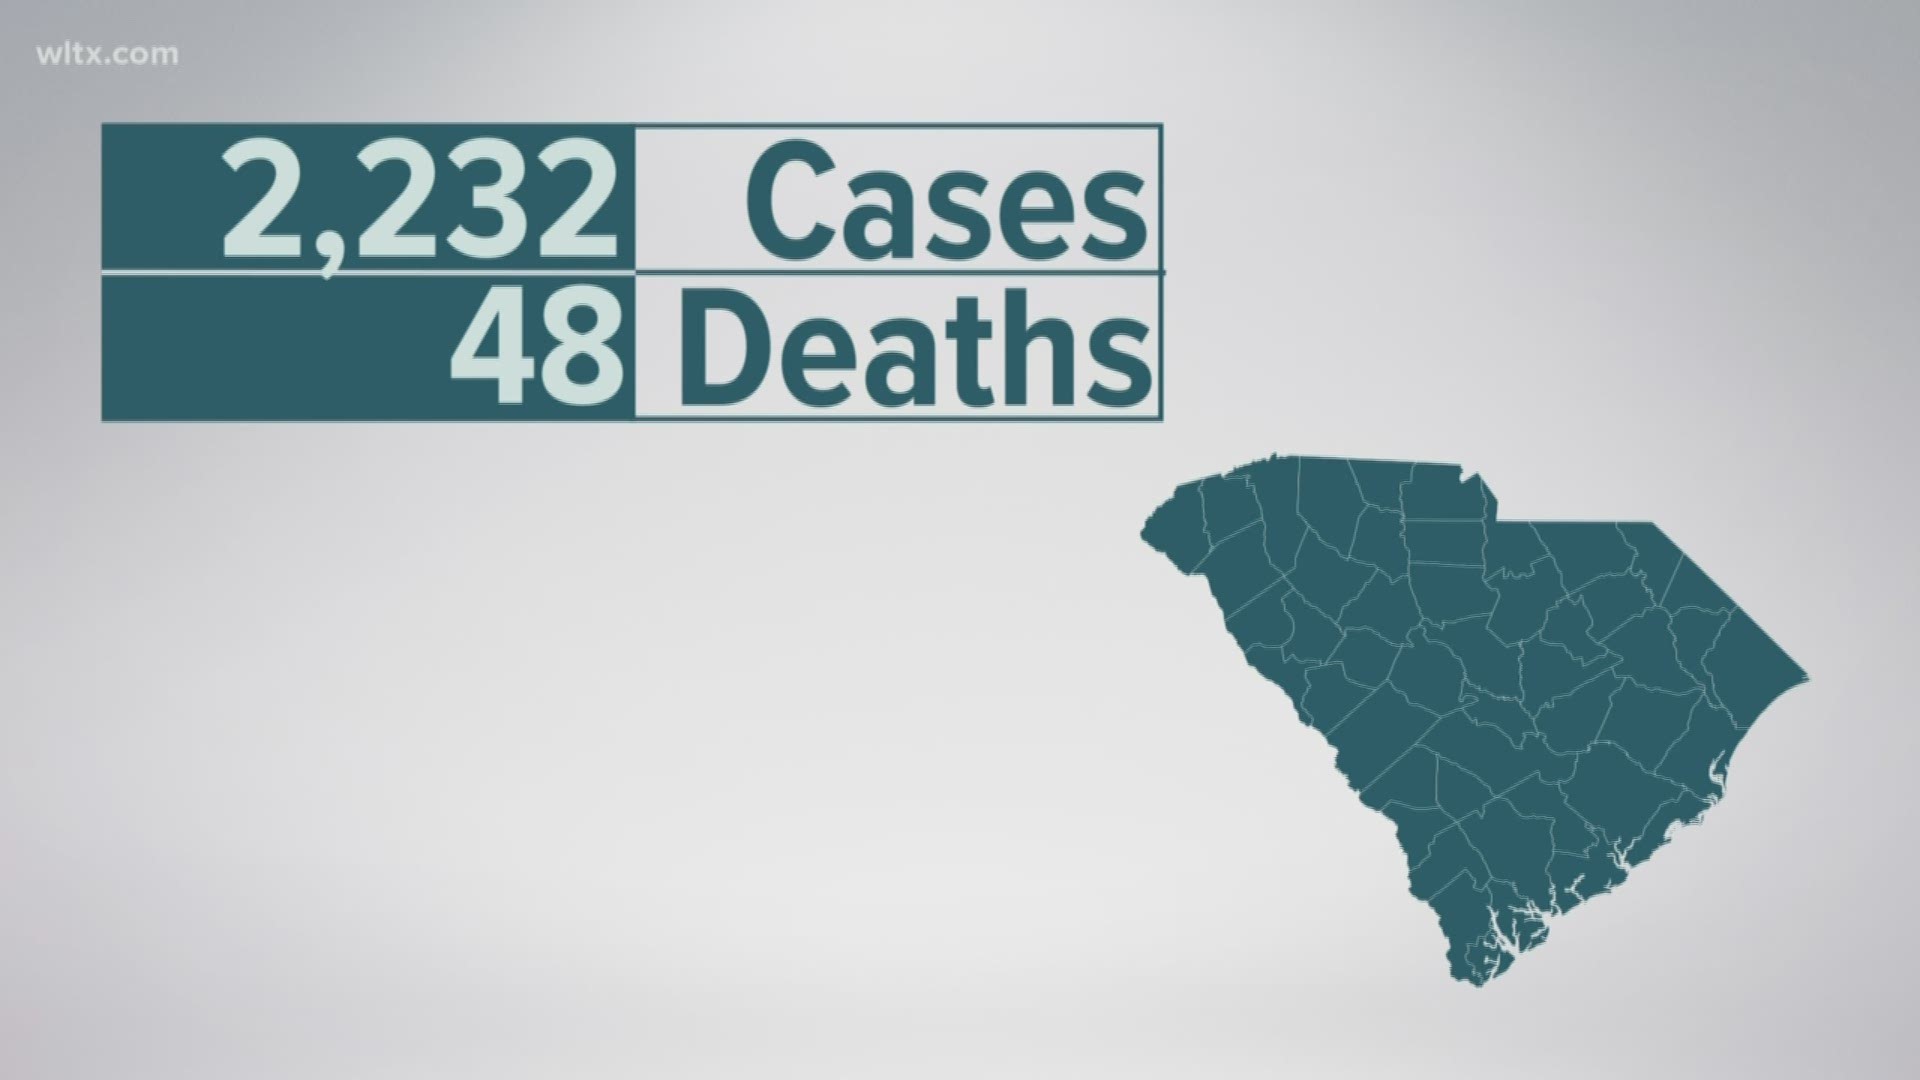 This brings the total number to 2,232 cases statewide.